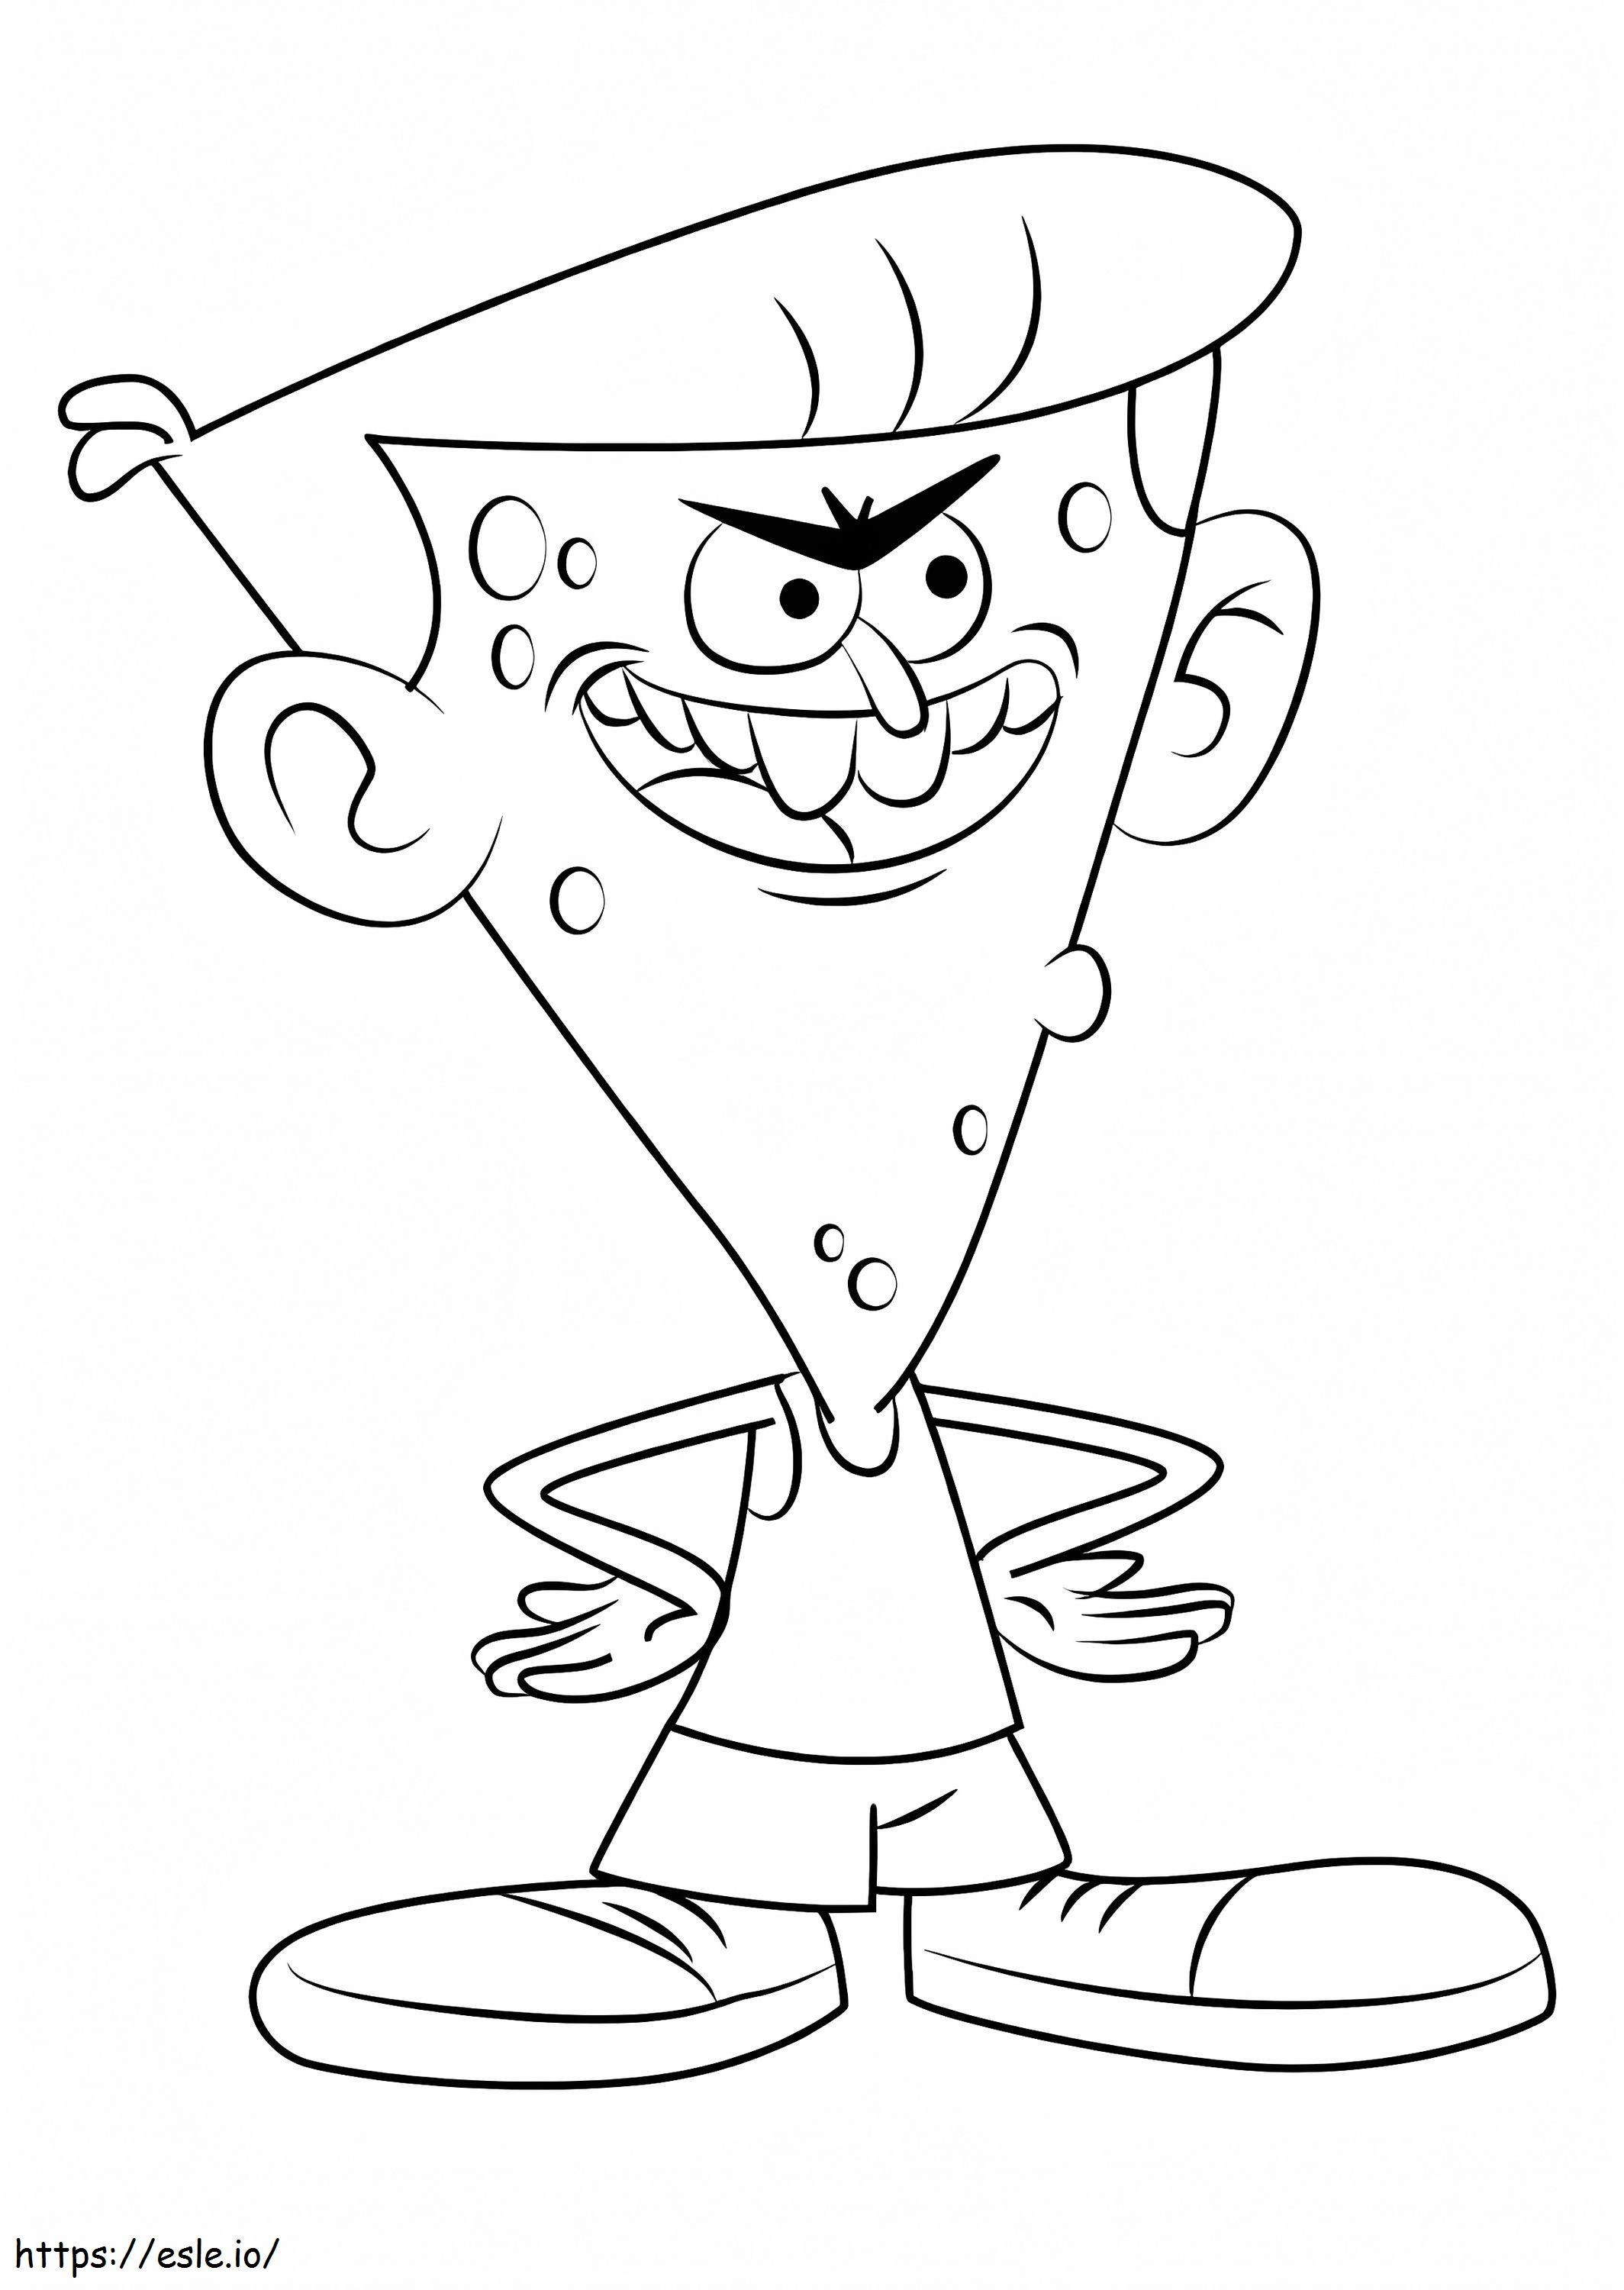 Tony Pepperoni From Uncle Grandpa coloring page